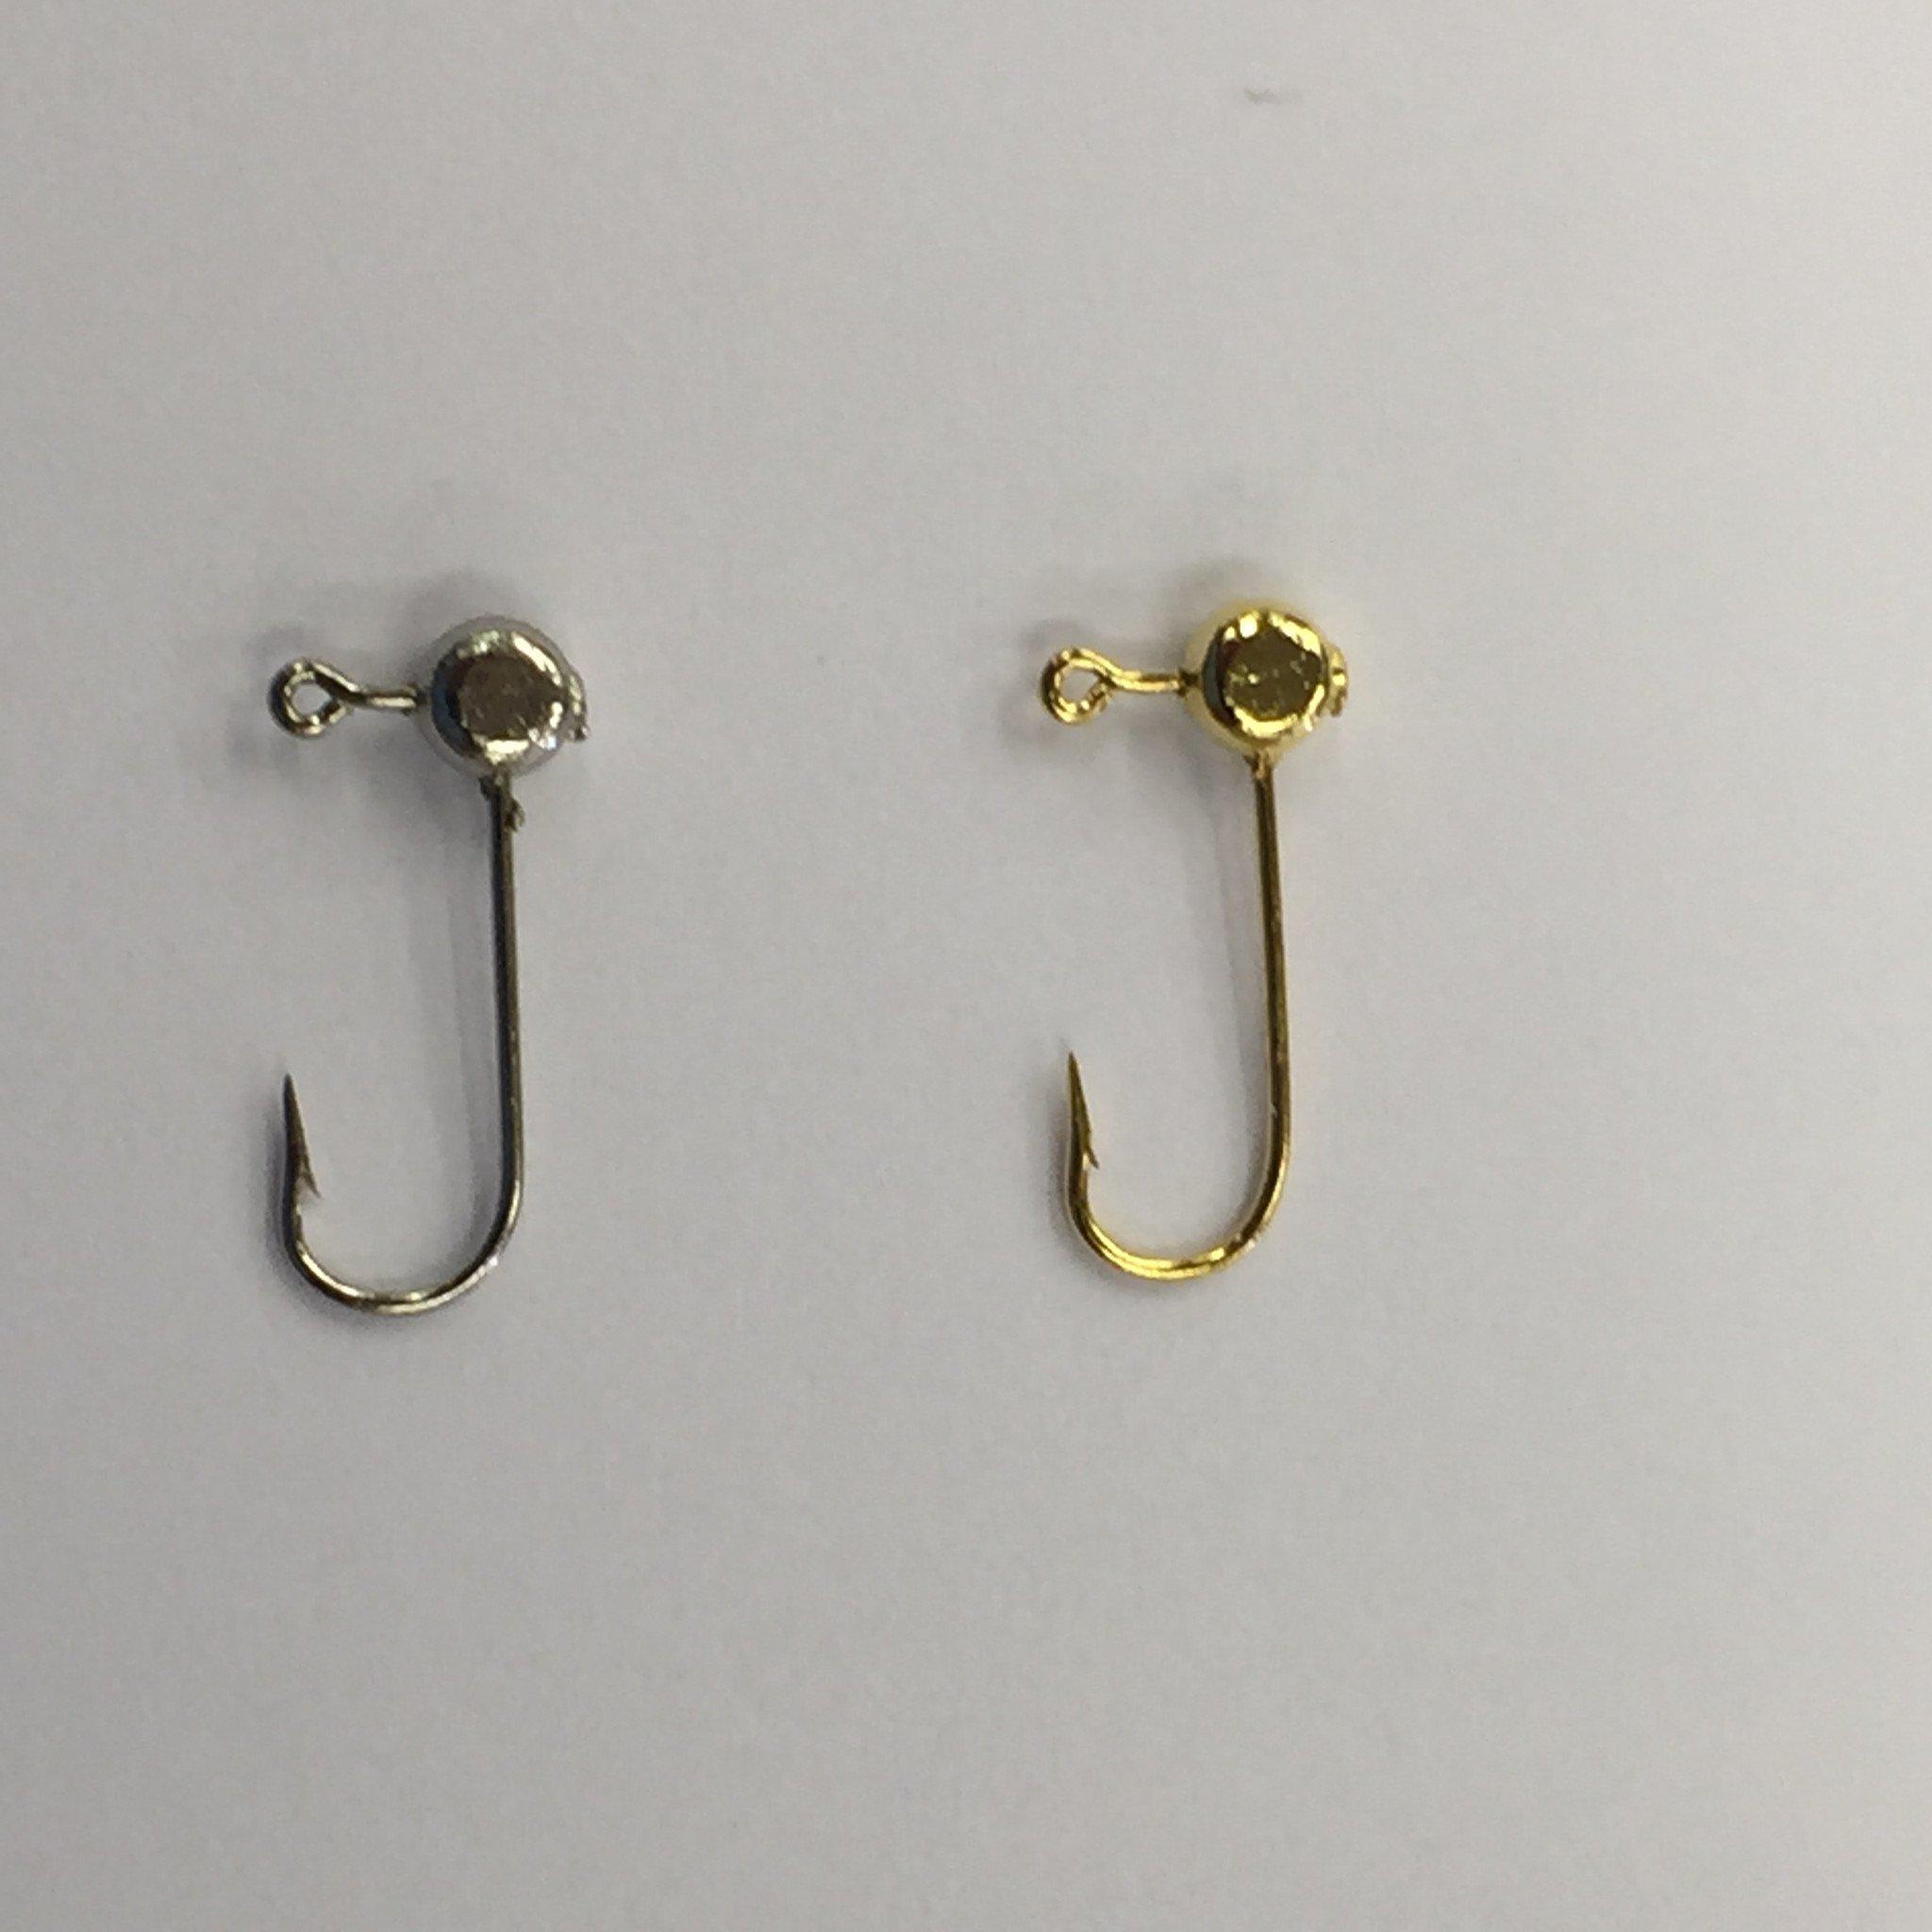 Wapsi Ball Style Jig Heads - The Trout Spot